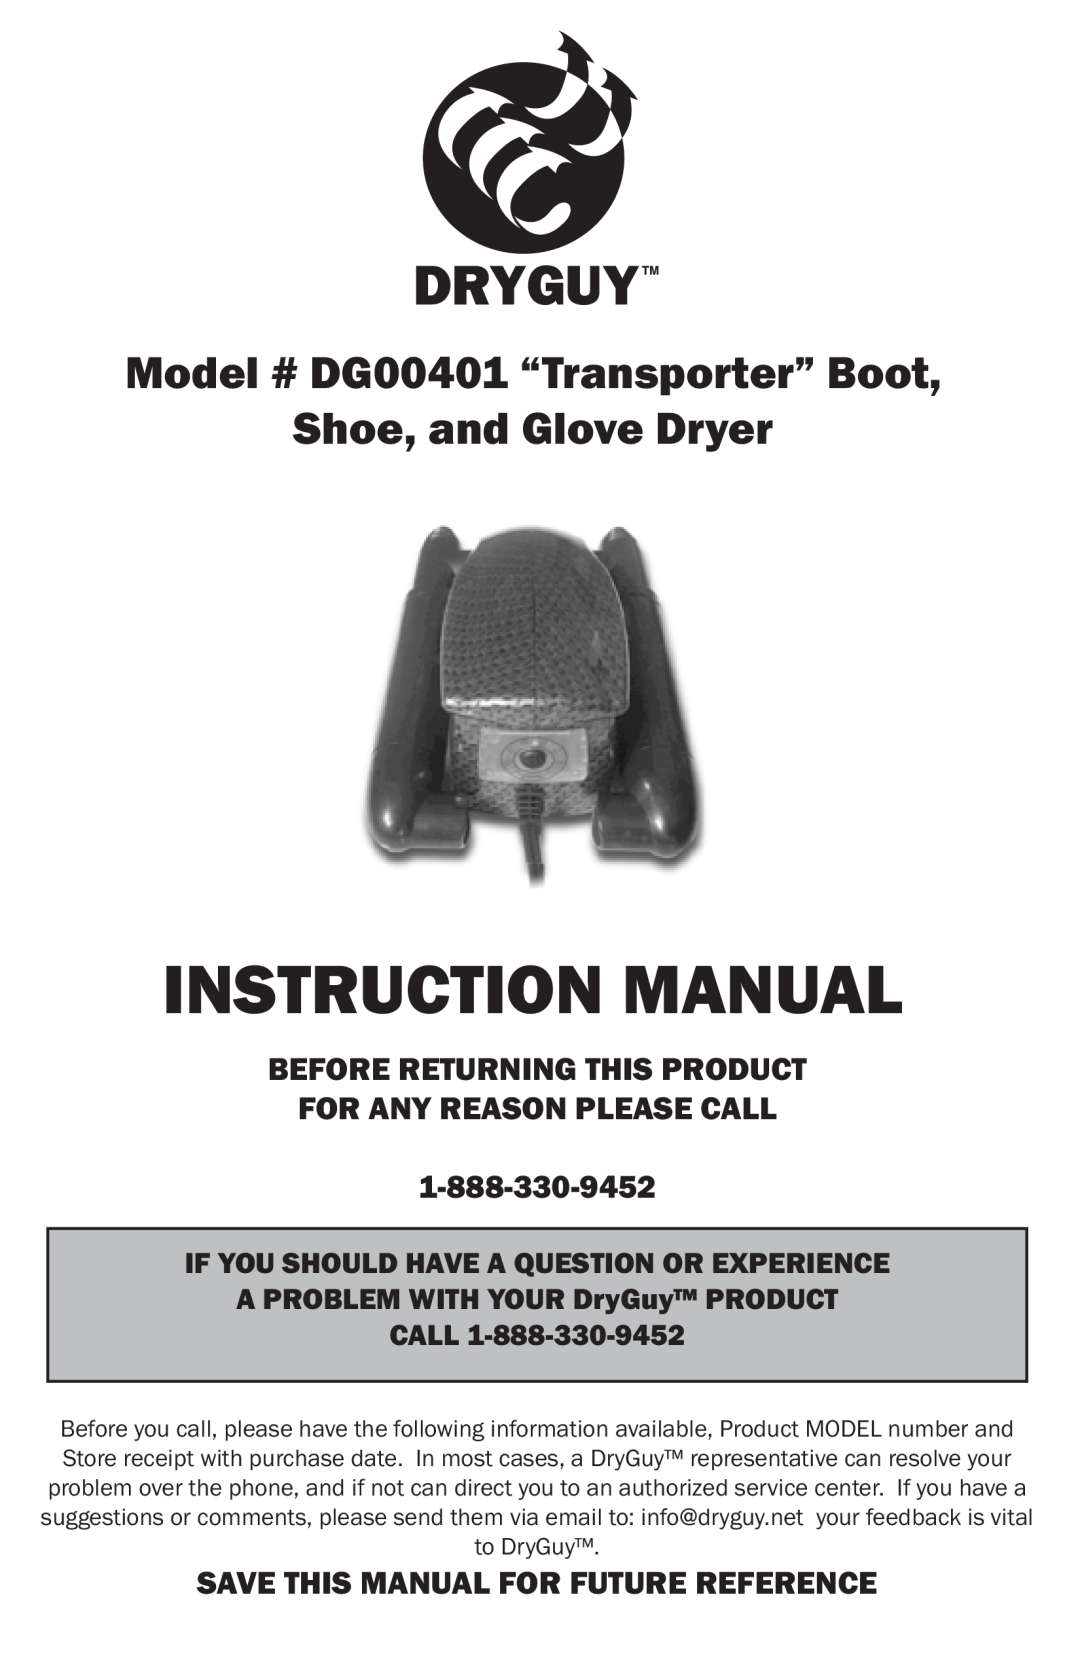 DryGuy DG00401 manual Before Returning This Product For Any Reason Please Call, Save This Manual For Future Reference 